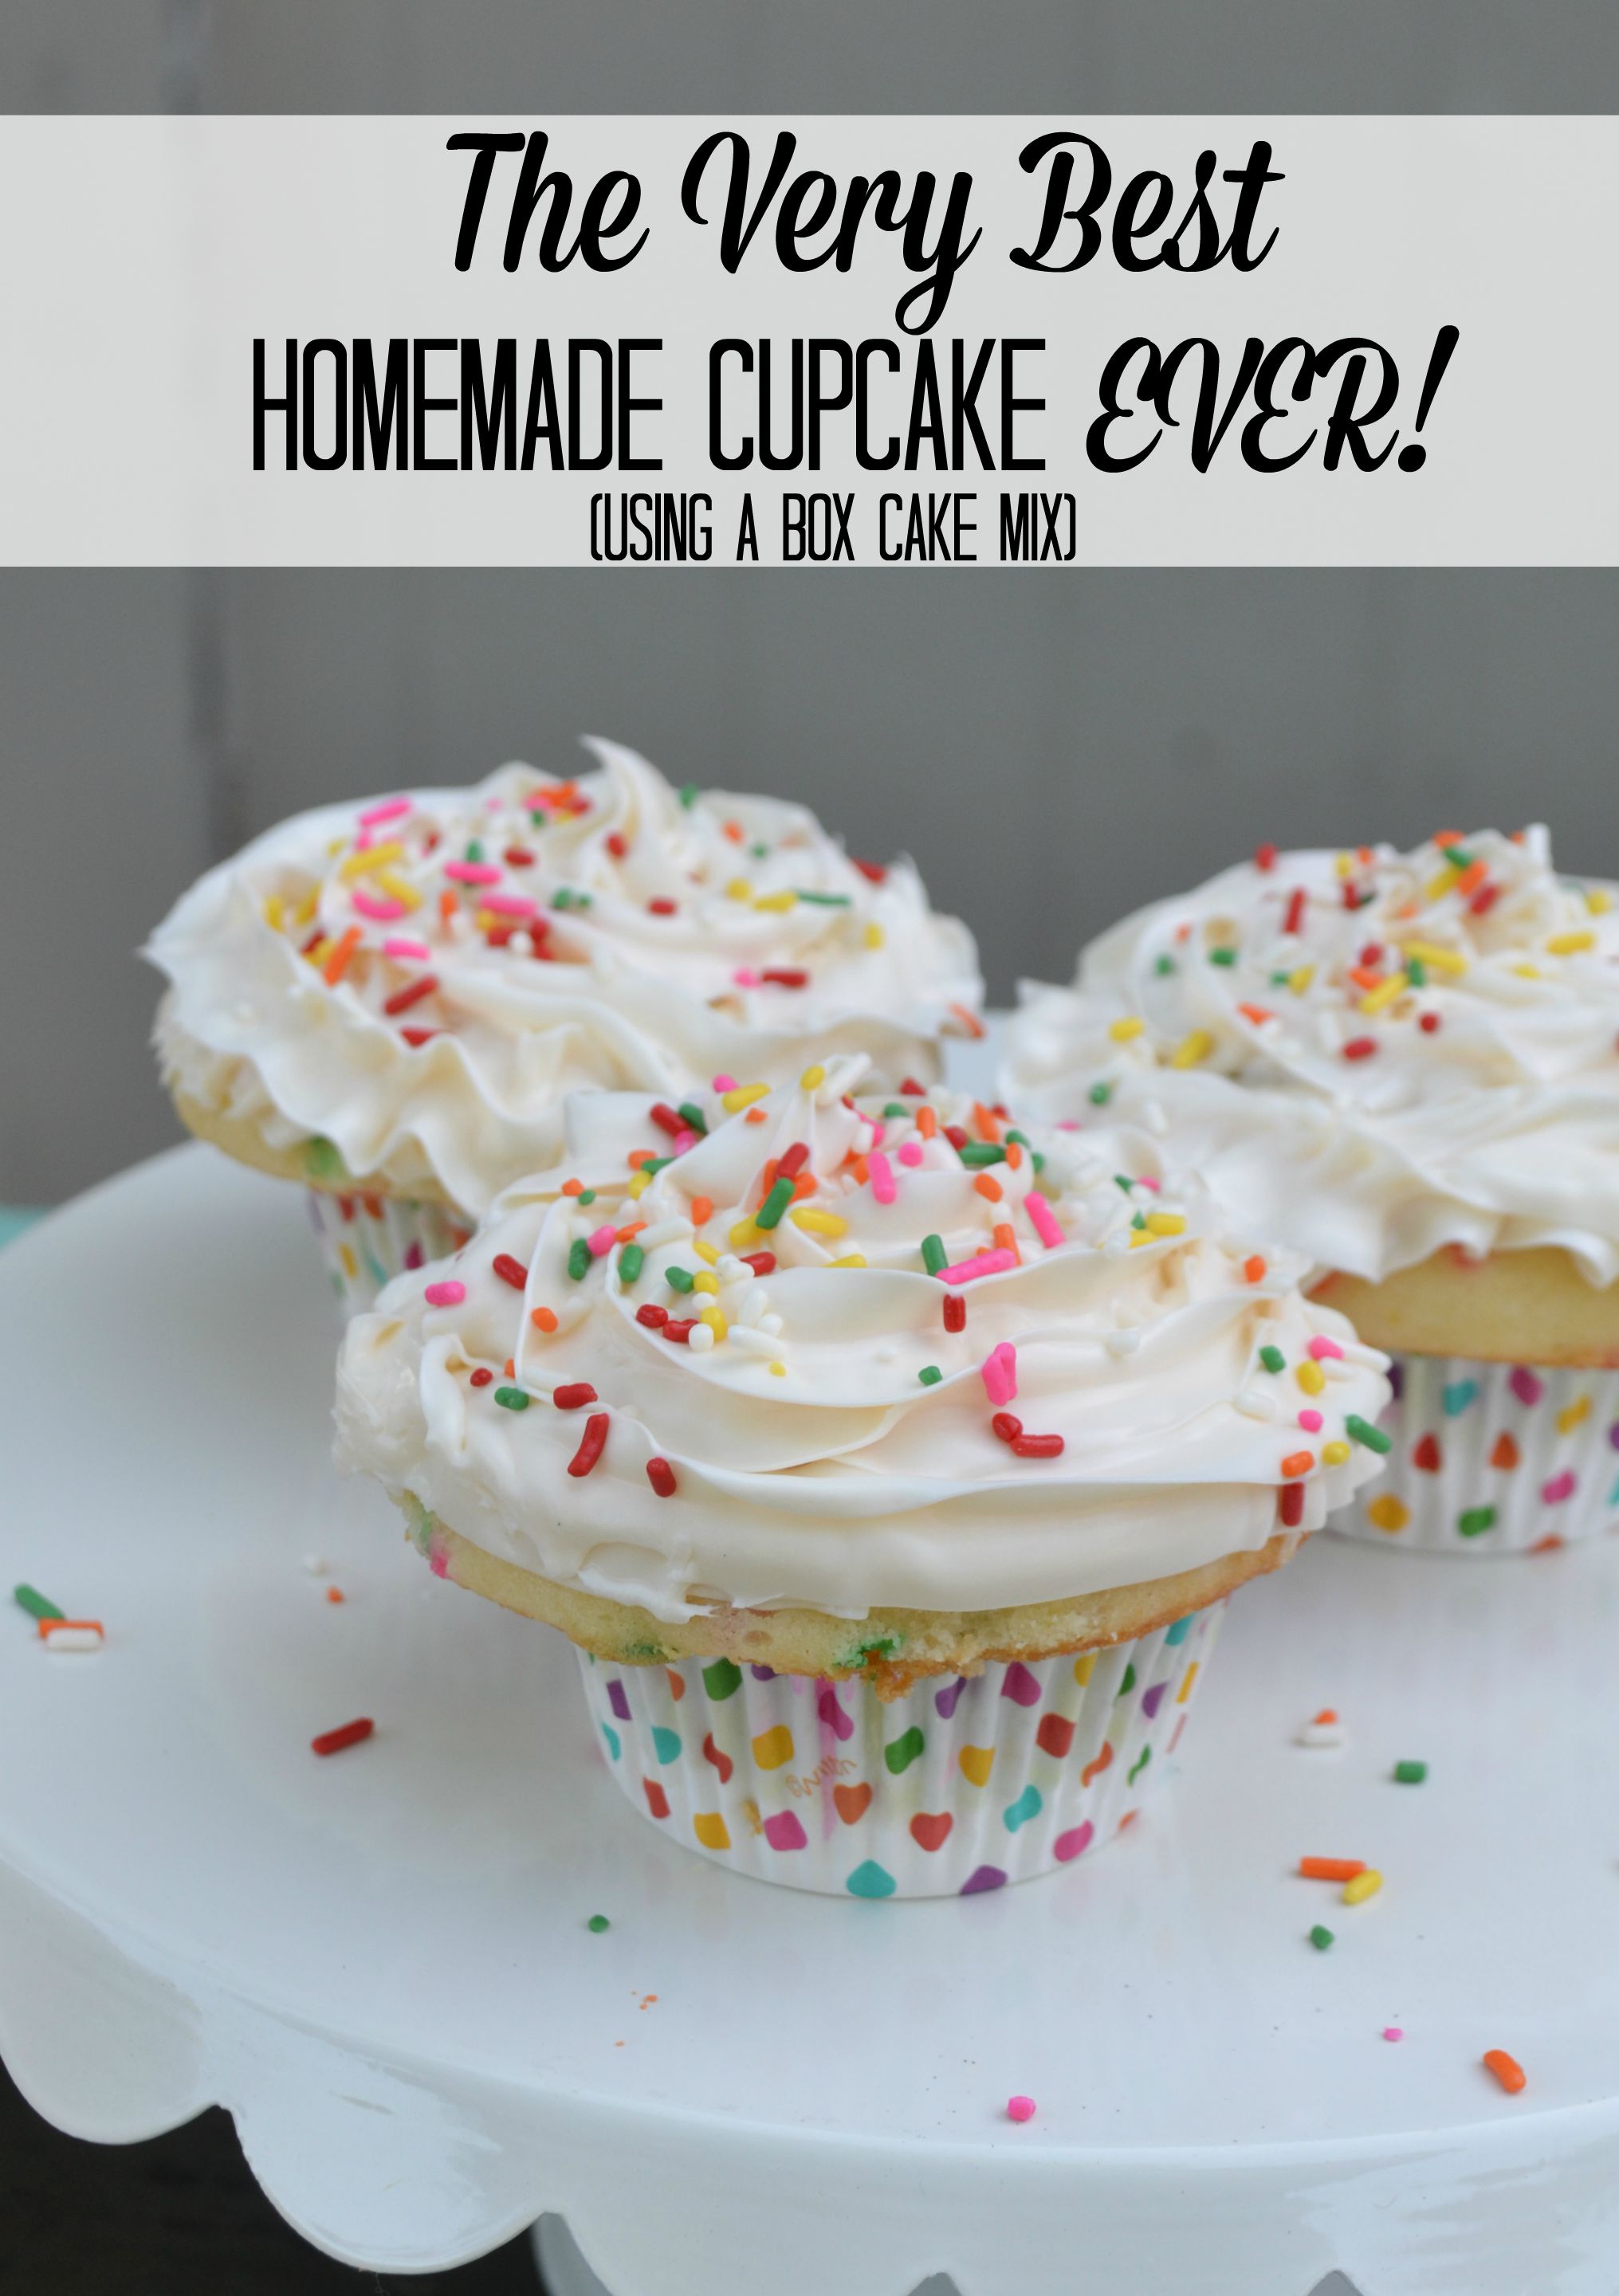 The Very Best Homemade Cupcake Ever